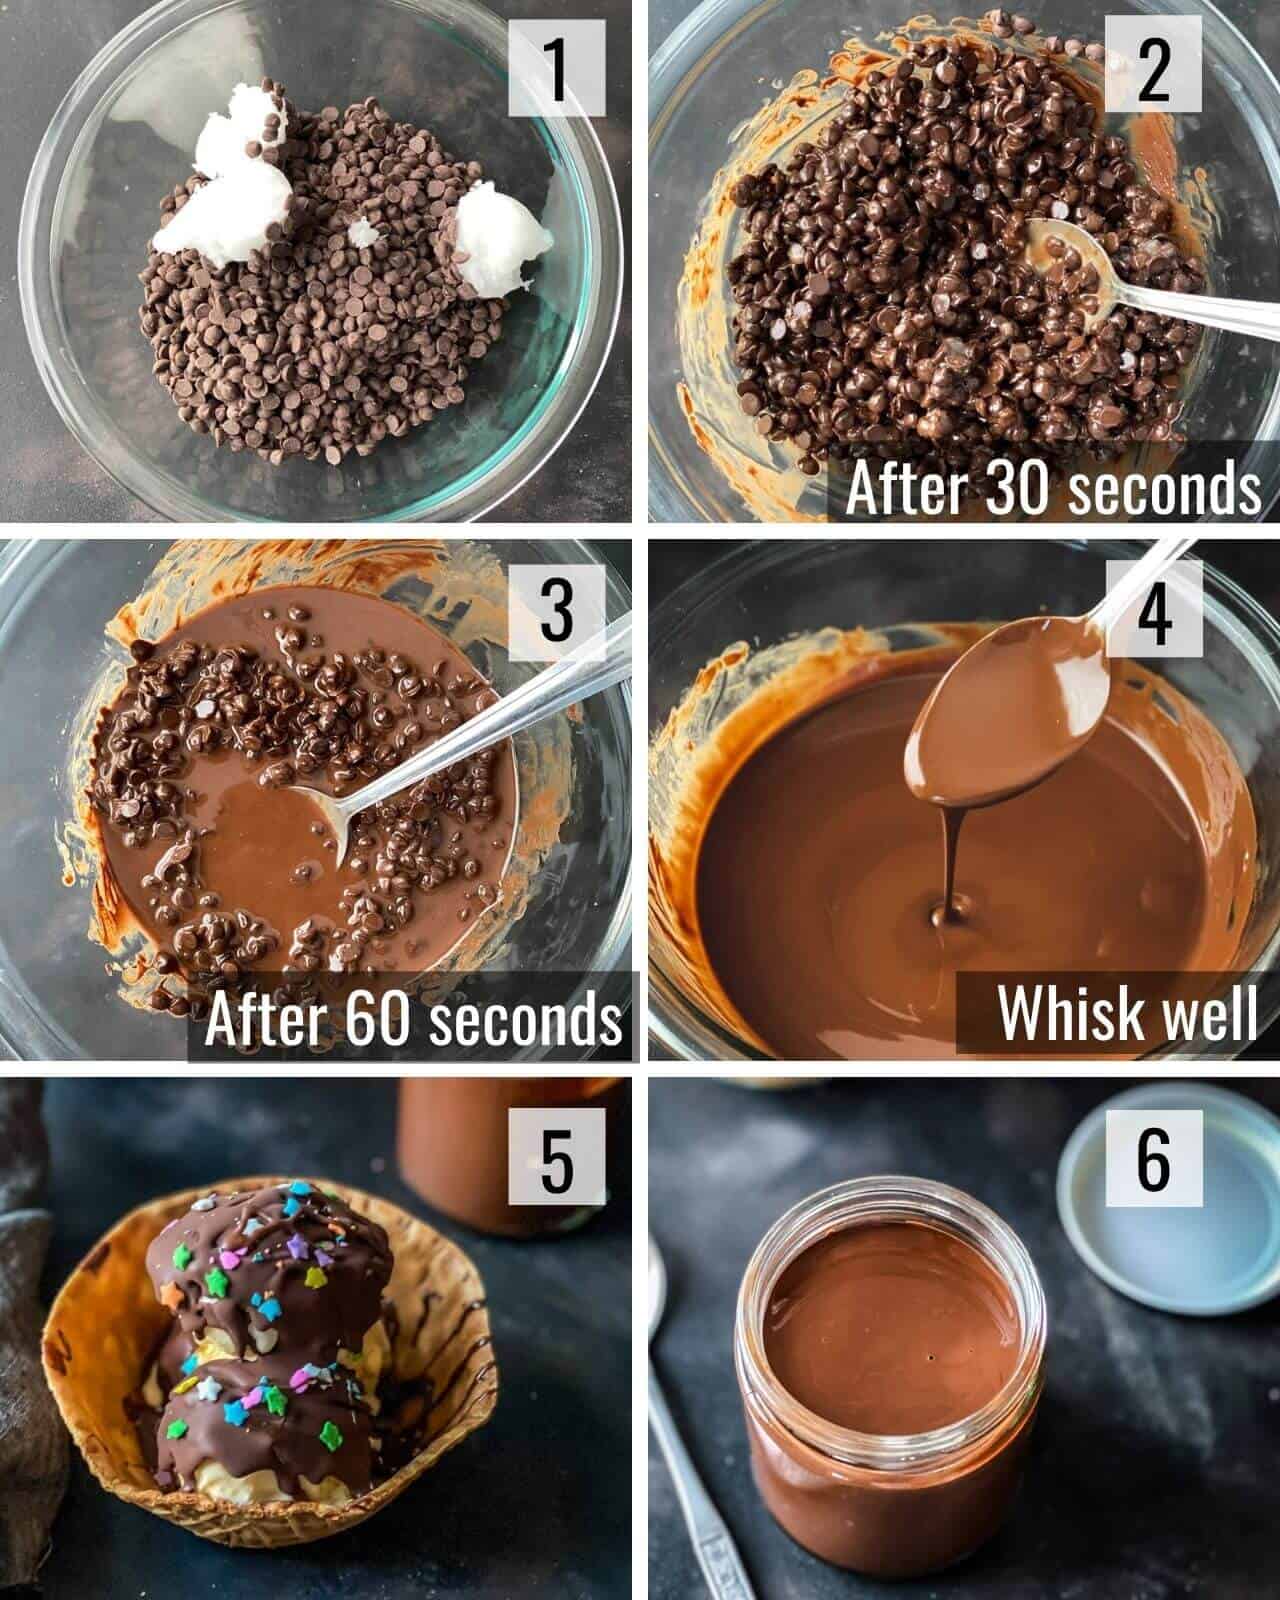 Step by step images of making magic shell sauce with 6 images from top to bottom, left to right showing a bowl with chocolate and coconut oil, then a bowl with slightly melted chocolate and coconut oil. then a bowl stirring the chocolate and coconut oil, then a bowl with the chocolate sauce, then a bowl of ice cream topped with chocolate sauce and finally a picture with a jar of chocolate magic shell sauce.